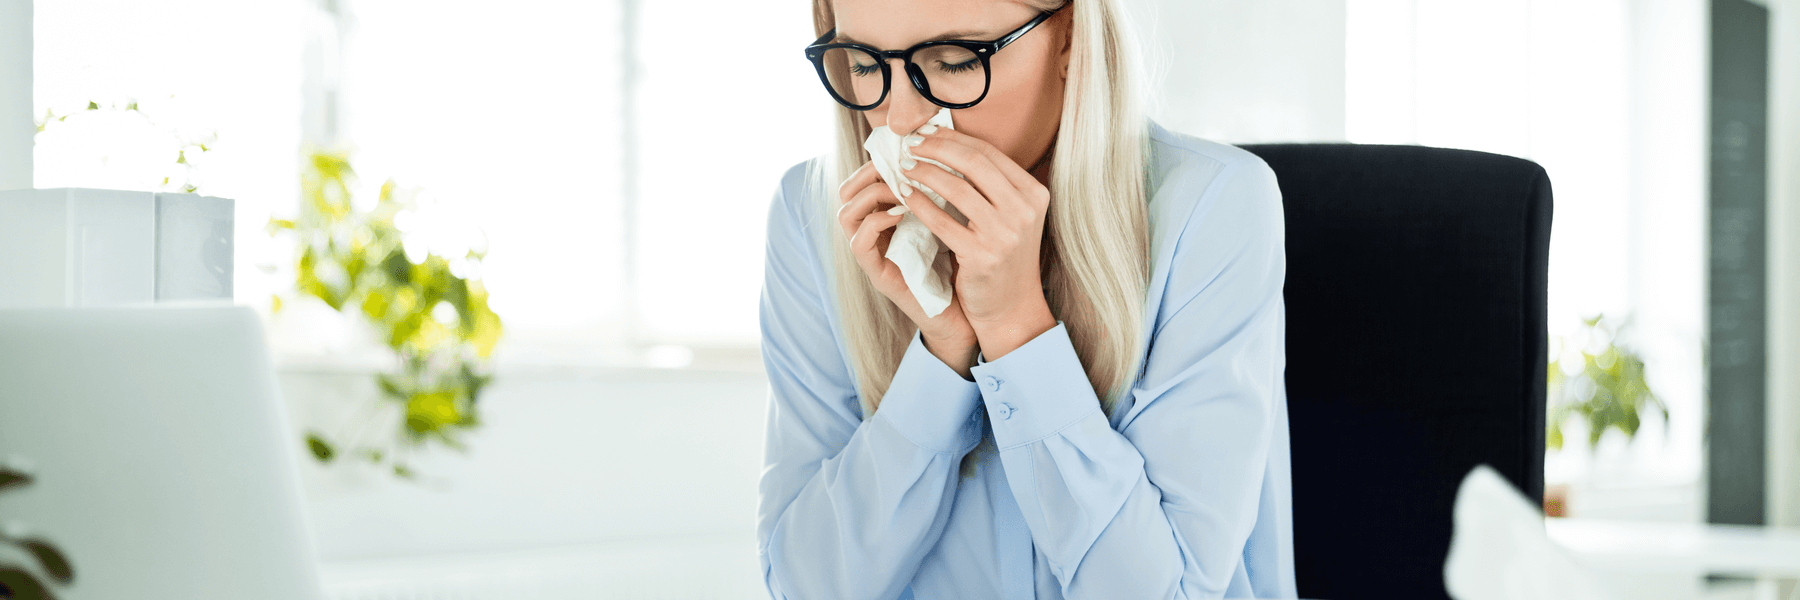 Blonde business woman wearing glasses sitting at office desk blowing nose